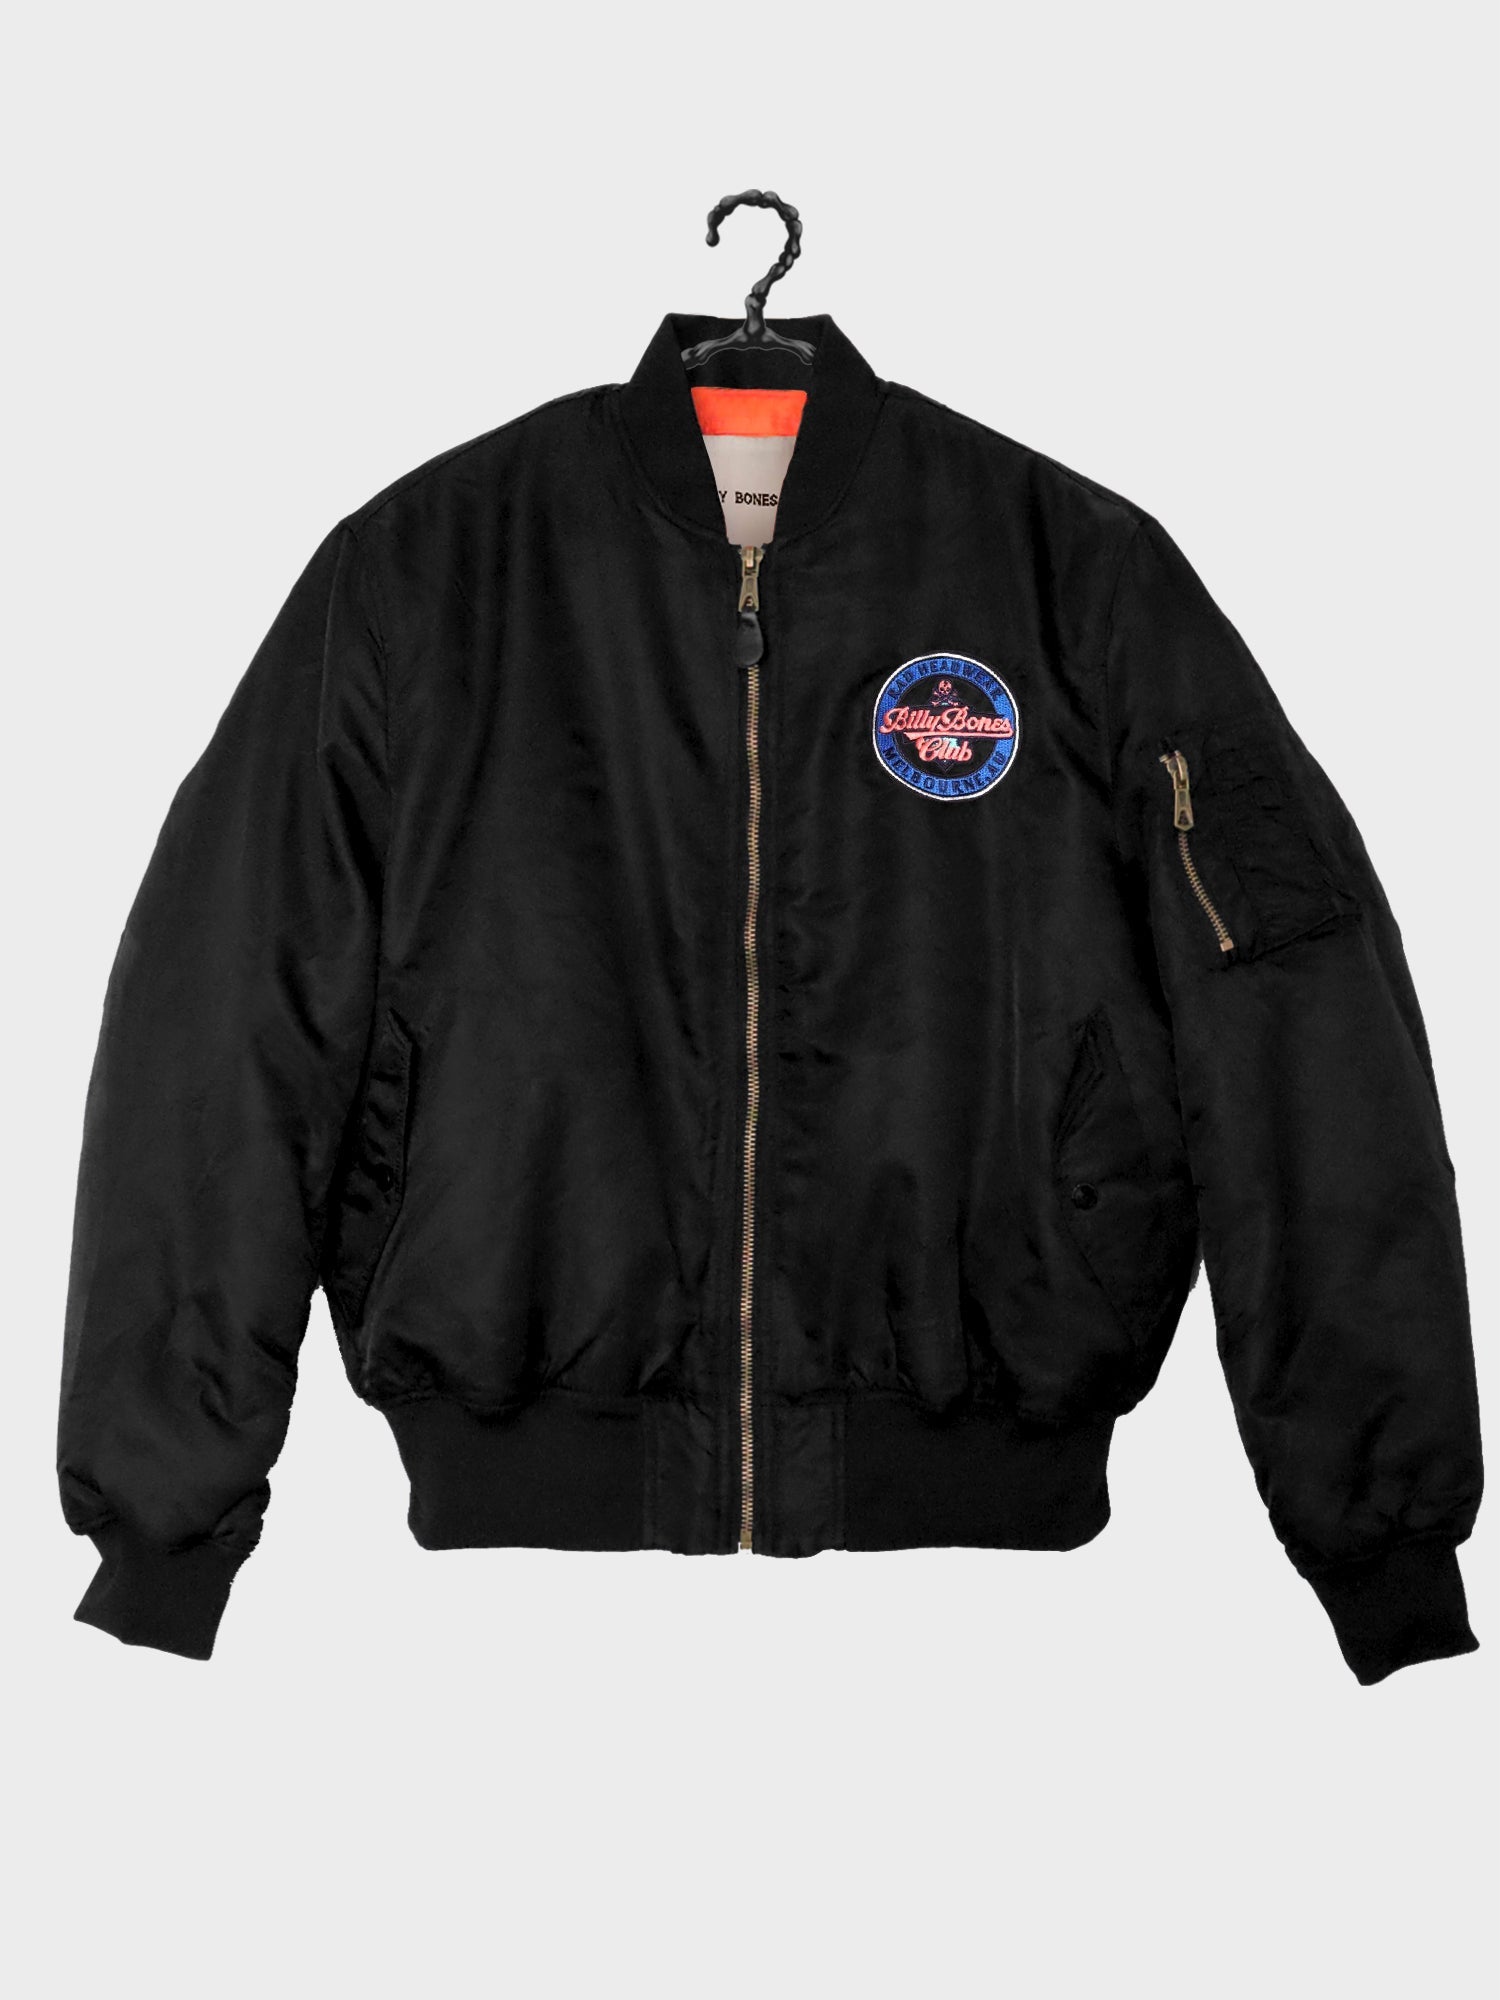 Ruthless_Bomber_Jacket_FRONT_CLOSED.jpg